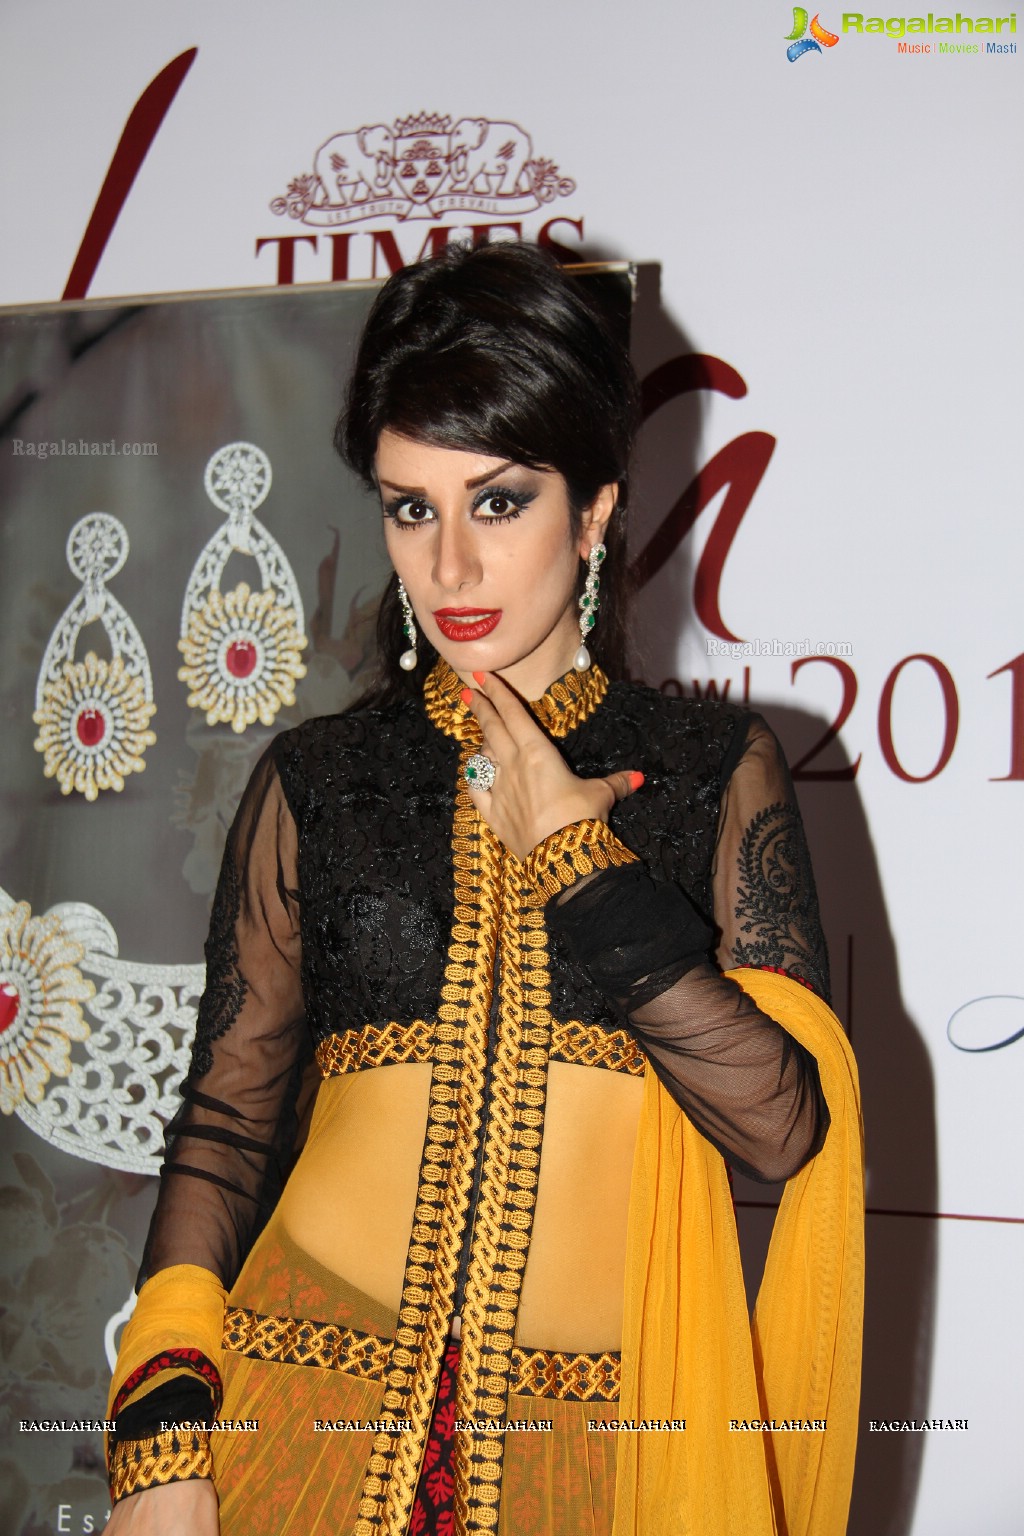 Shreedevi Chowdary inaugurates Times Gehena Jewellery and Bridal Exhibition